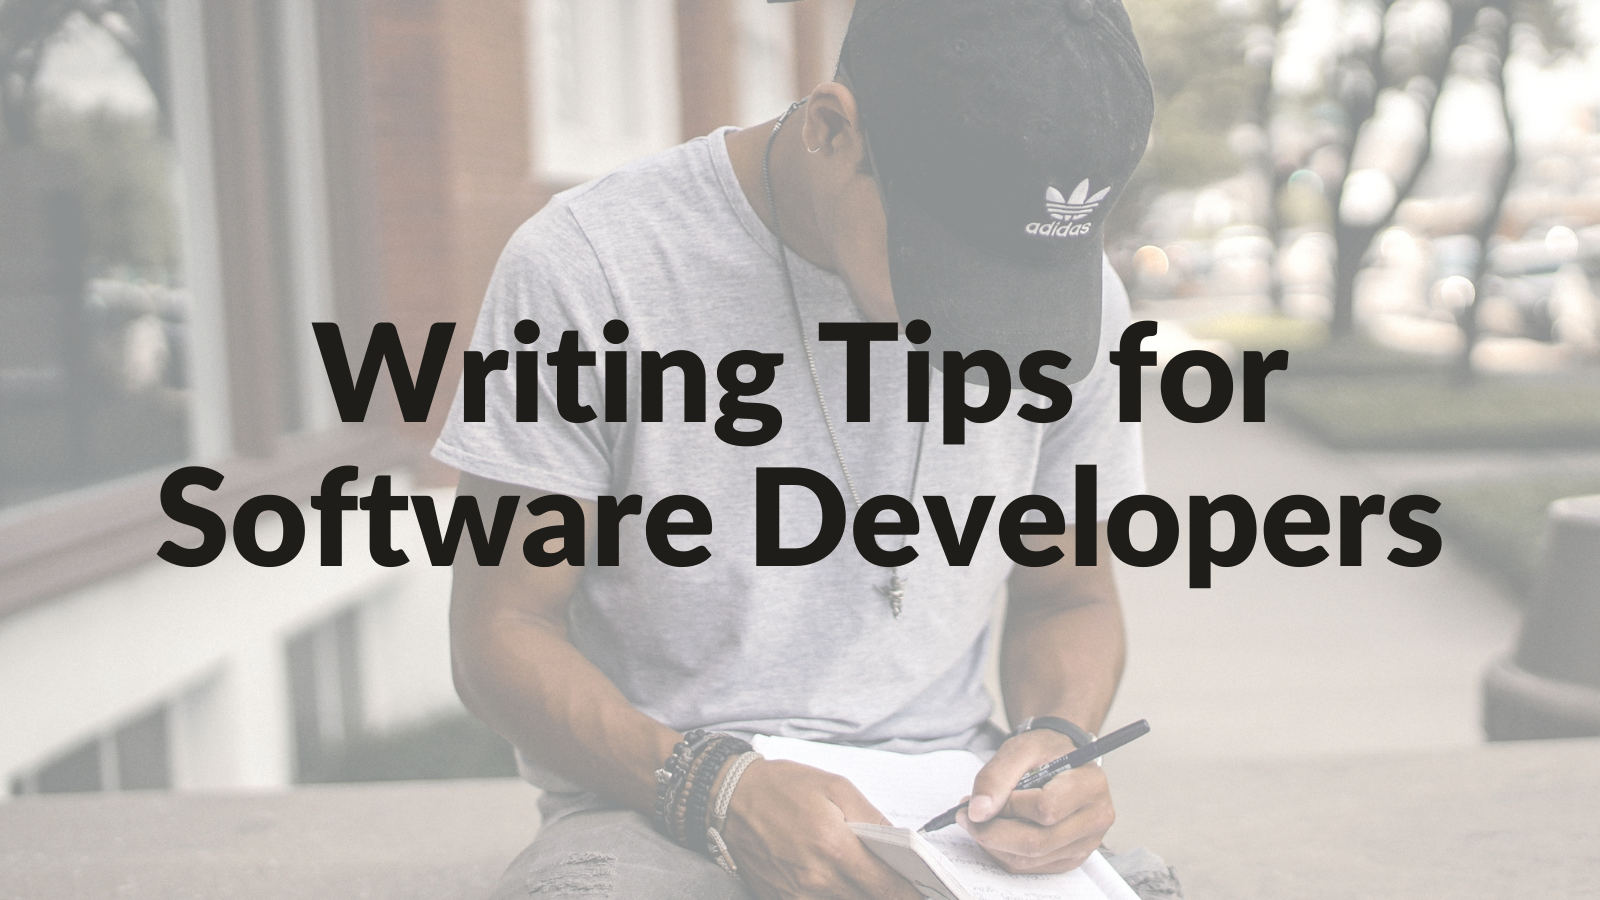 Writing Tips for Software Developers – How to Become a Better Tech Writer